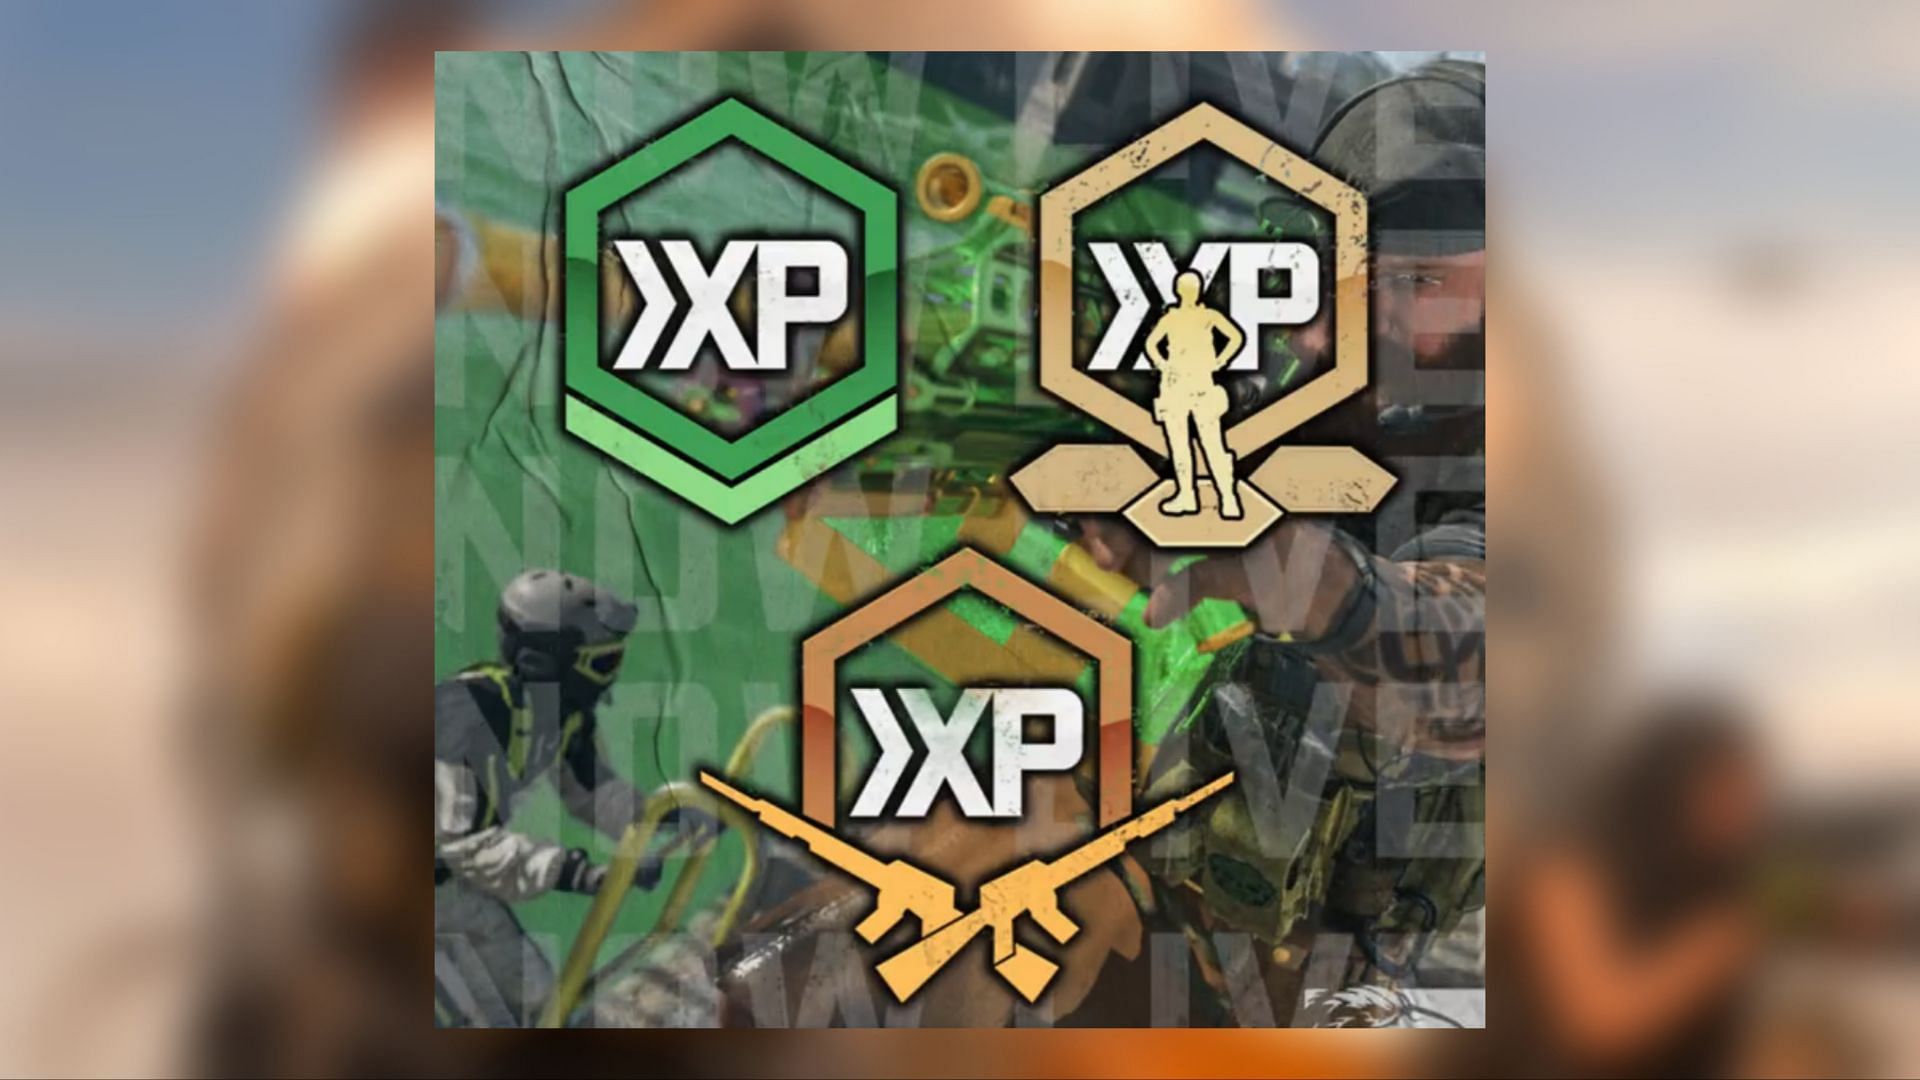 All about the Double XP event in Modern Warfare 2 and Warzone 2 (Image by Raven Software)